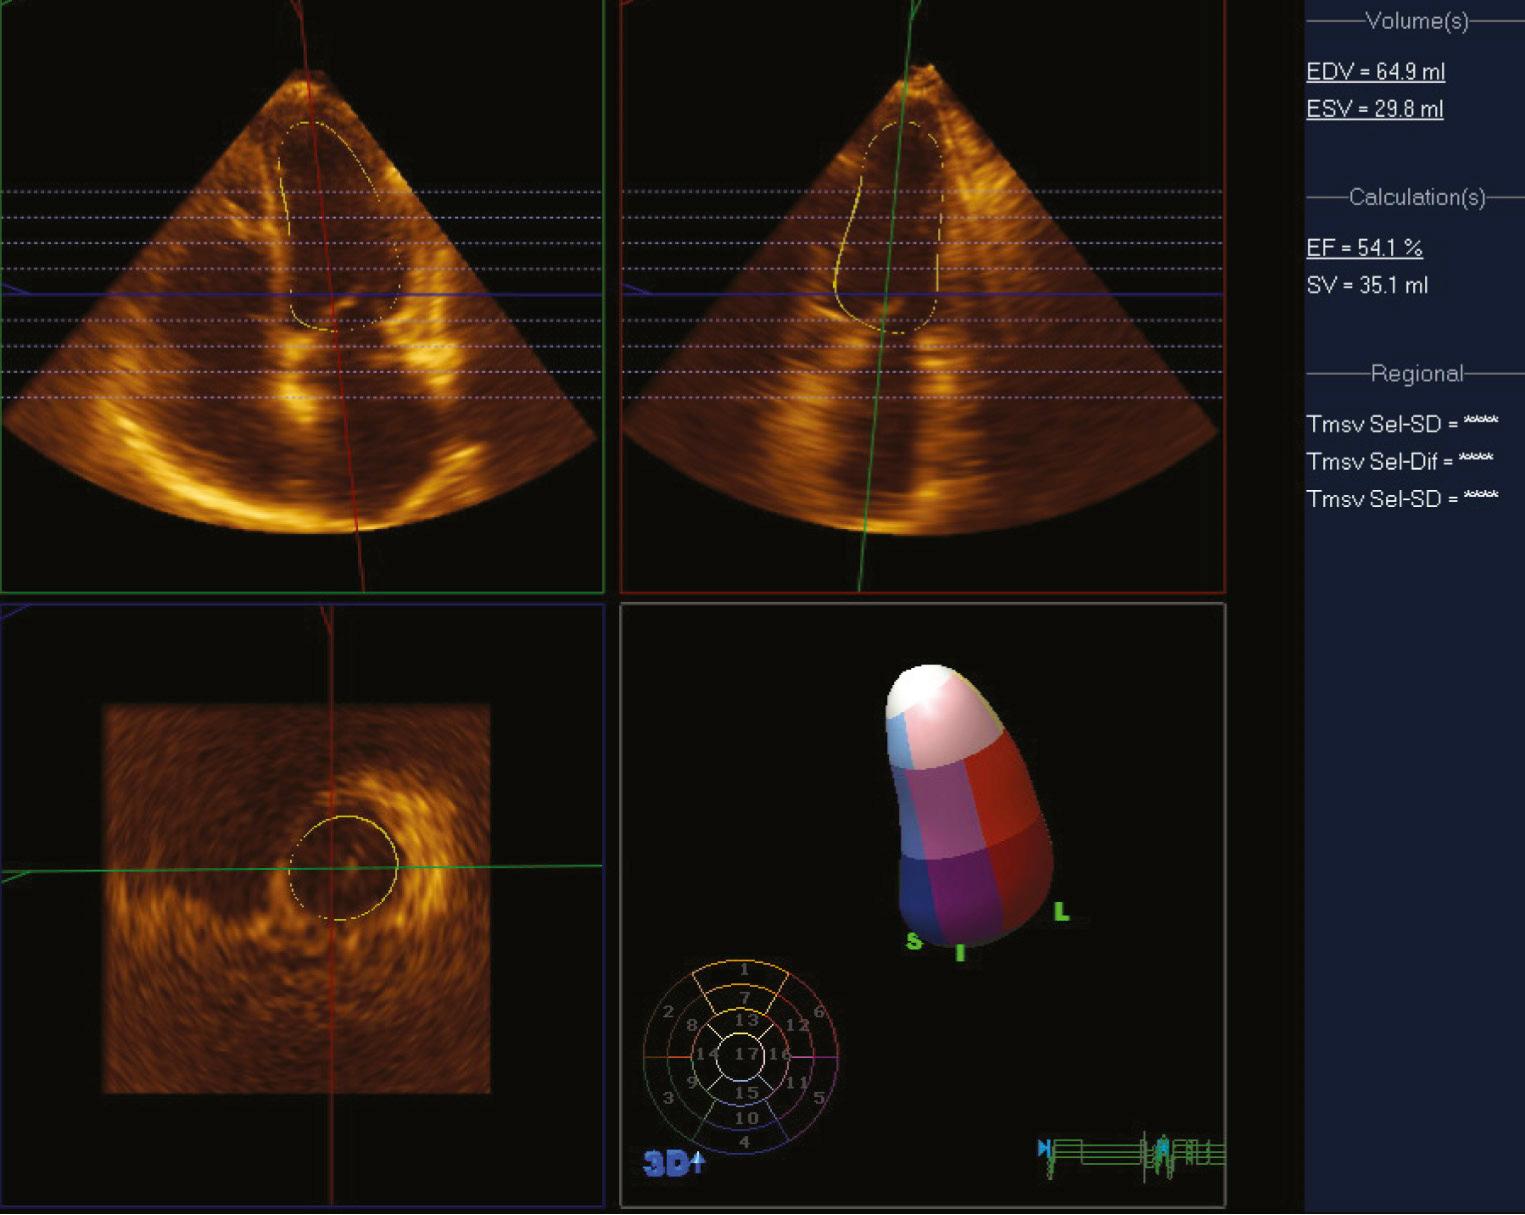 FIGURE 55-16, Three-dimensional volume data set of the left ventricle (LV) with an end-diastolic volume (EDV) of 64.9 mL, an end-systolic volume (ESV) of 29.8 mL, a stroke volume (SV) of 35.1 mL, and an LV ejection fraction of 54.1%.